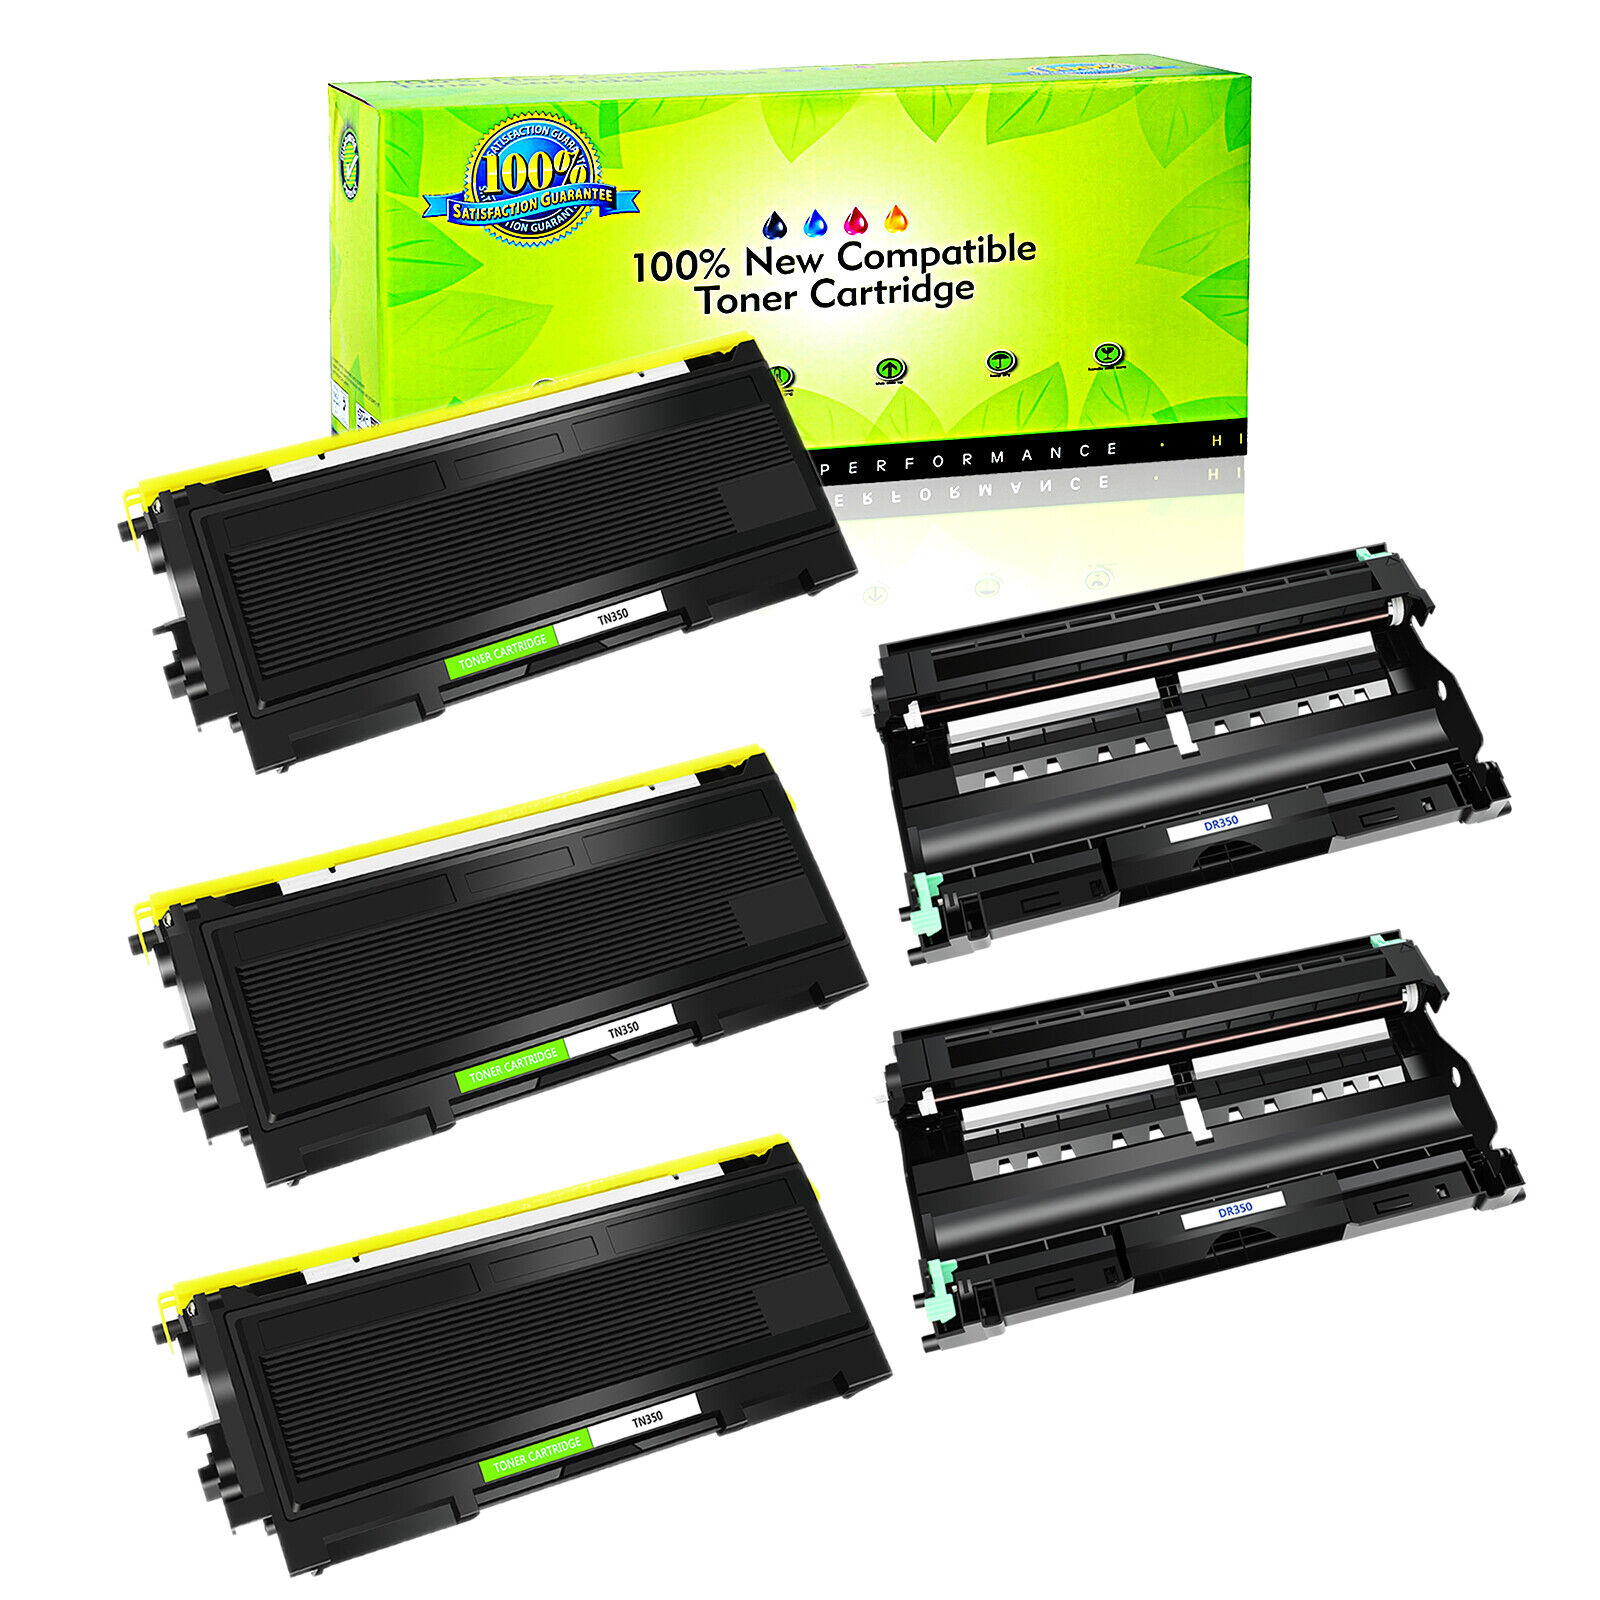 High Yield 3PK TN350 Toner+2PK DR350 Drum for Brother MFC-7220 MFC-7420 Printer